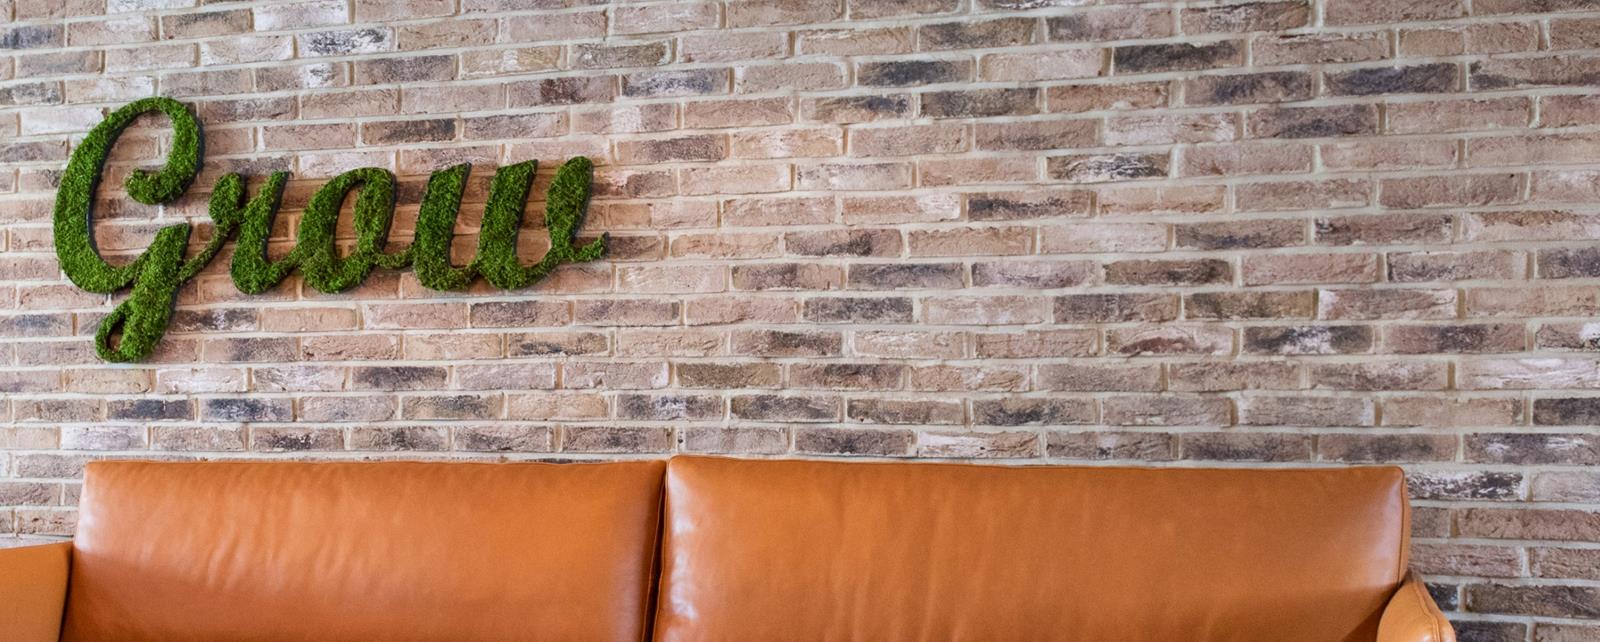 Leather Couch Against Brick Wall With Sign Made Of Plants On Wall